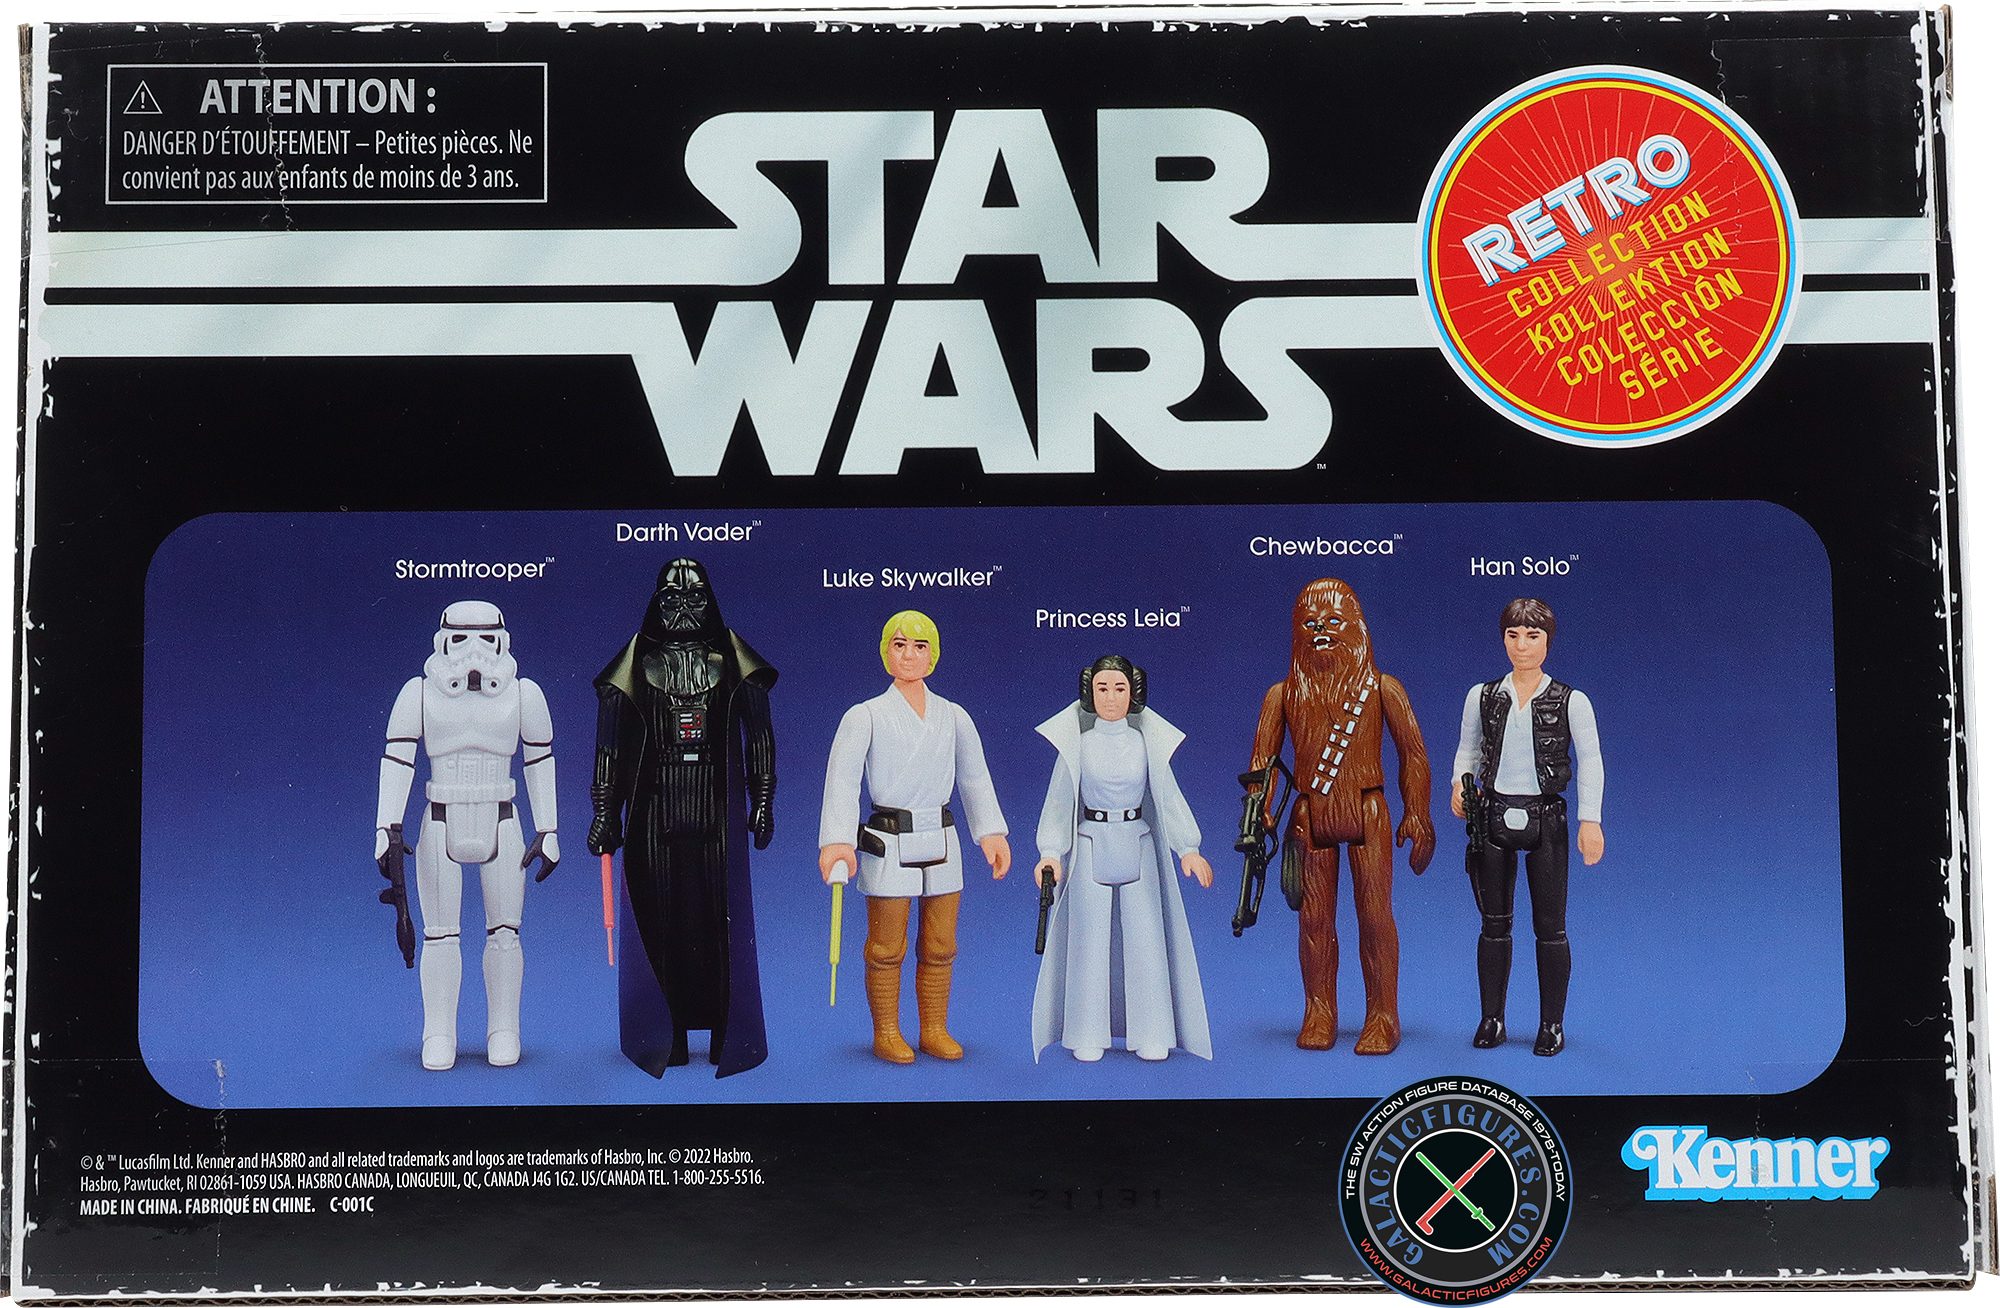 Stormtrooper A New Hope 6-Pack #1